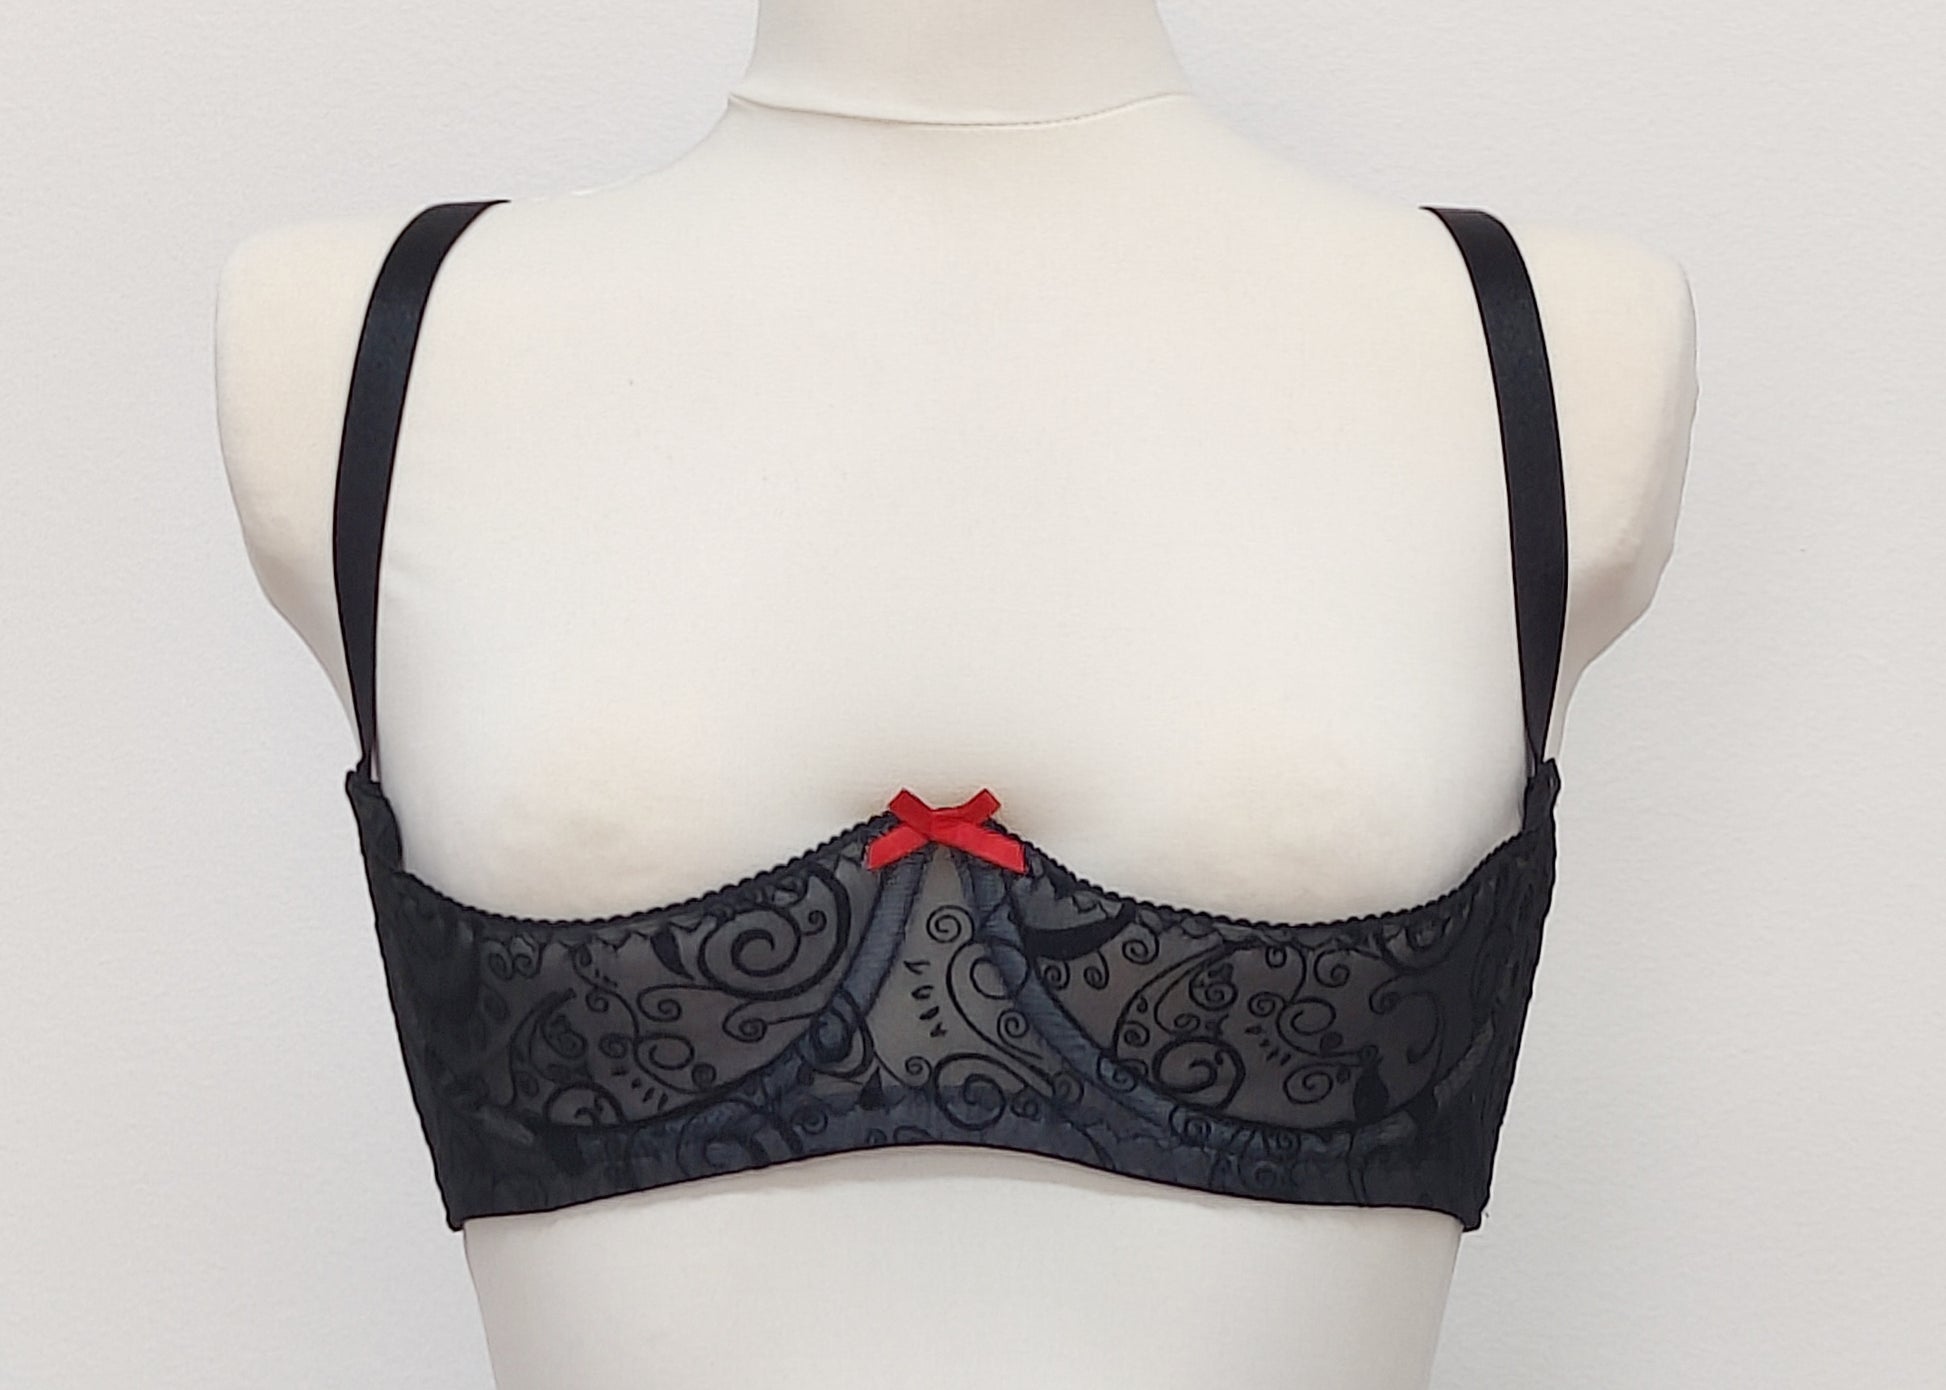 black swirl patterned mesh, quarter cup bra with red bow